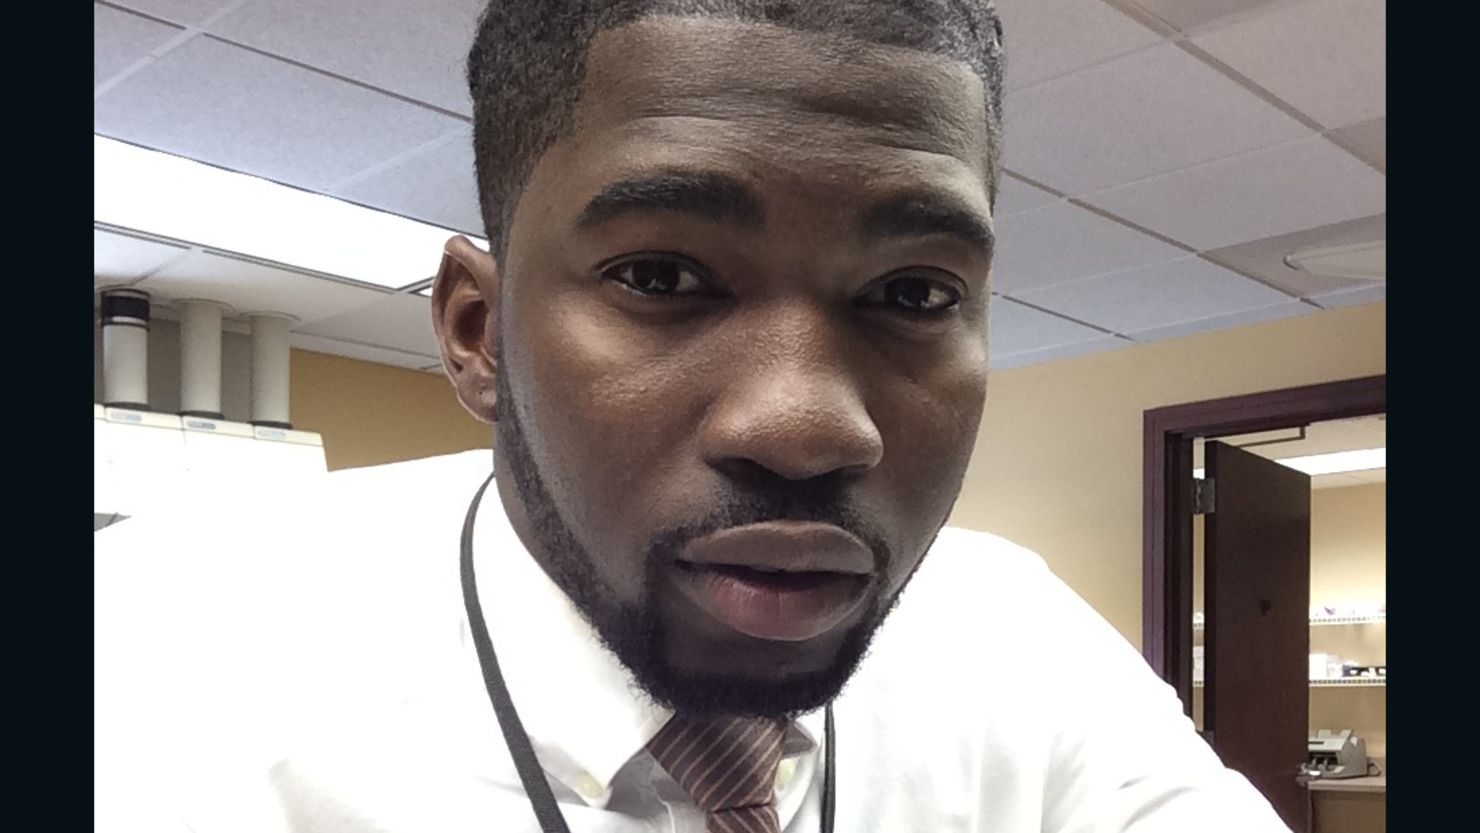 Matthew Ajibade, 21, was diagnosed with bipolar disorder three years ago, his attorney said.